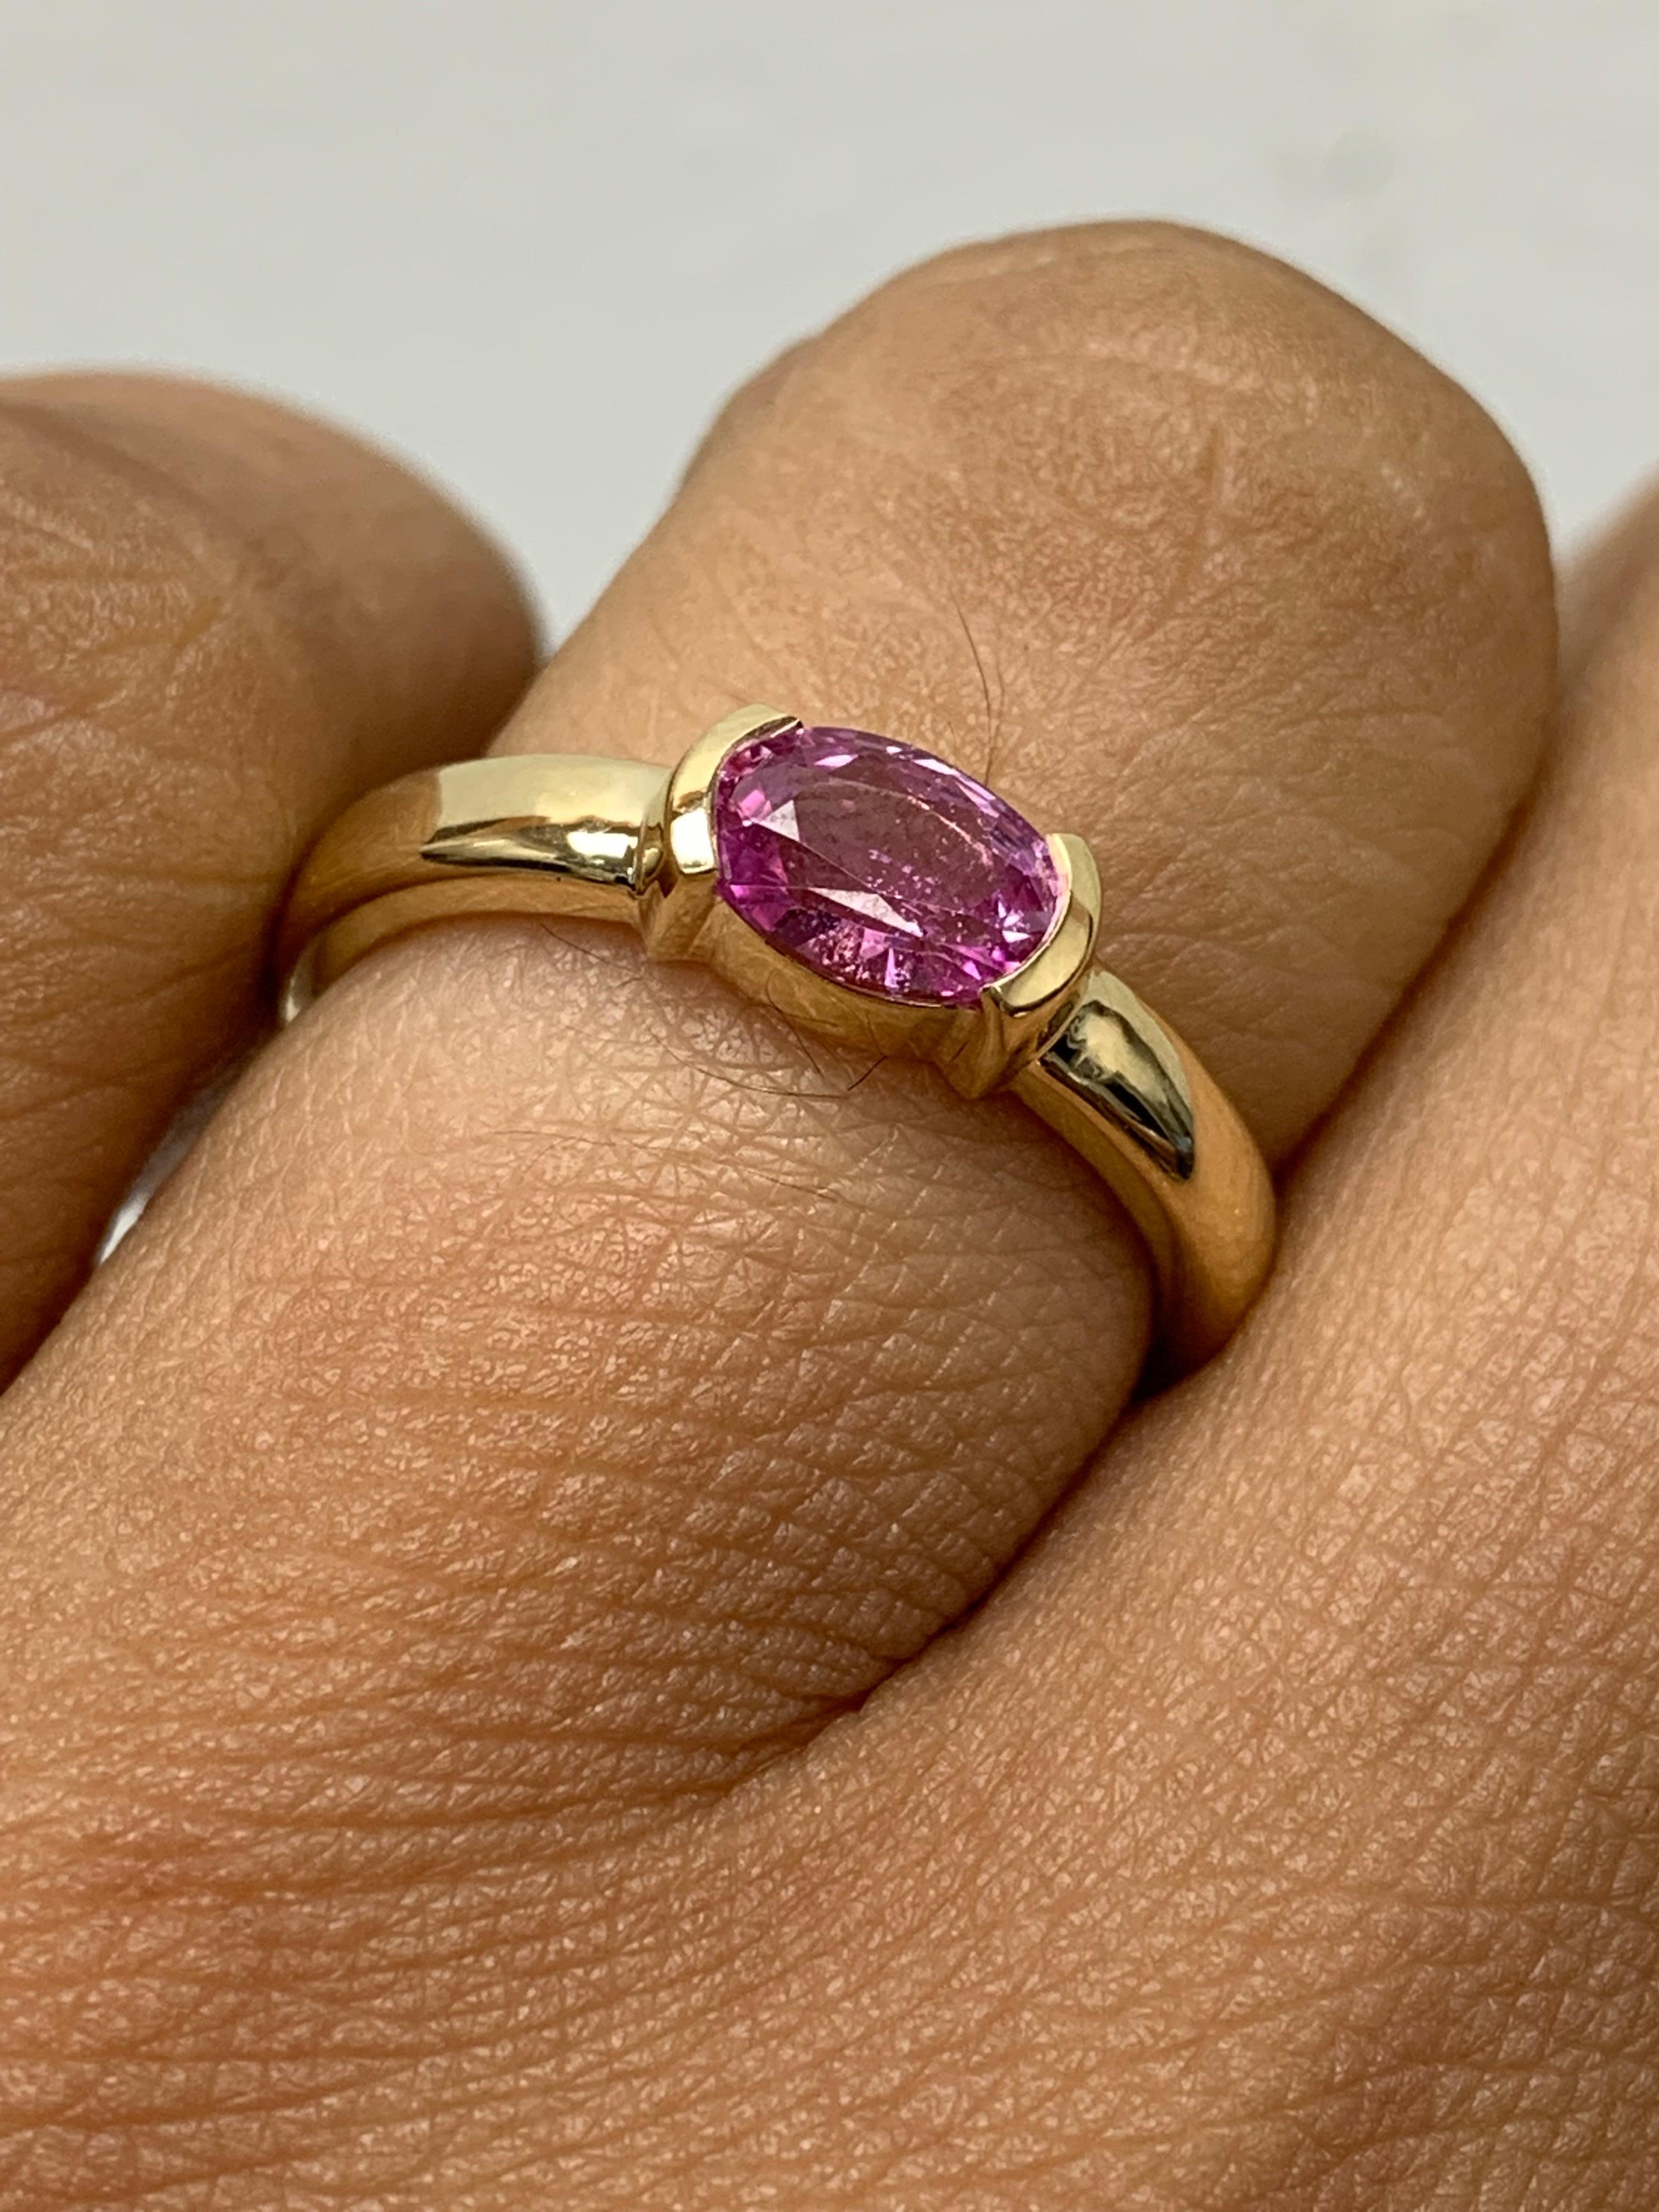 0.73 Carat Oval Cut Pink Sapphire Band Ring in 14K Yellow Gold For Sale 6